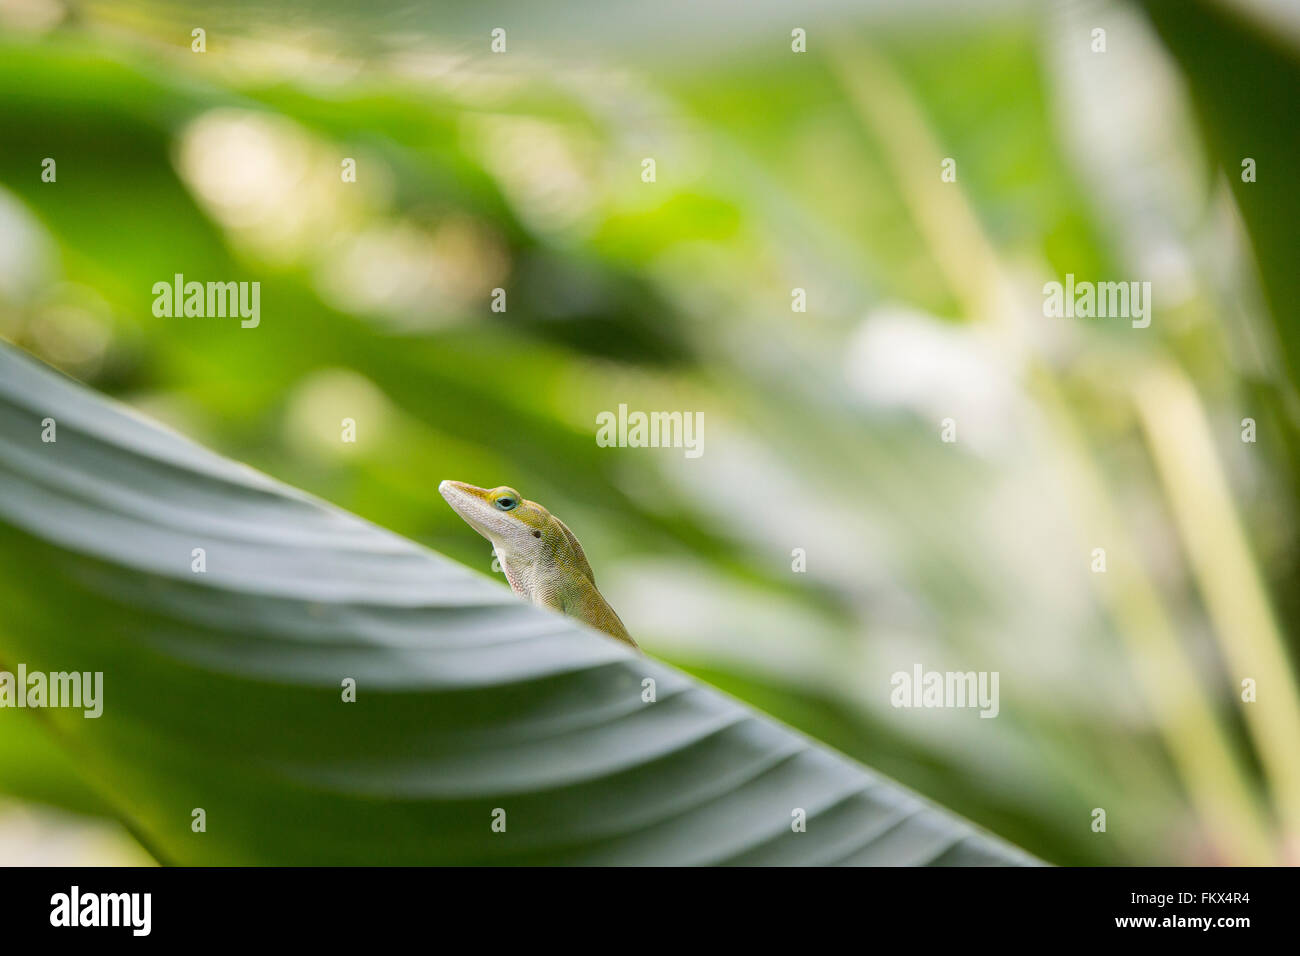 A Green Anole lizard at the Eden Project Stock Photo